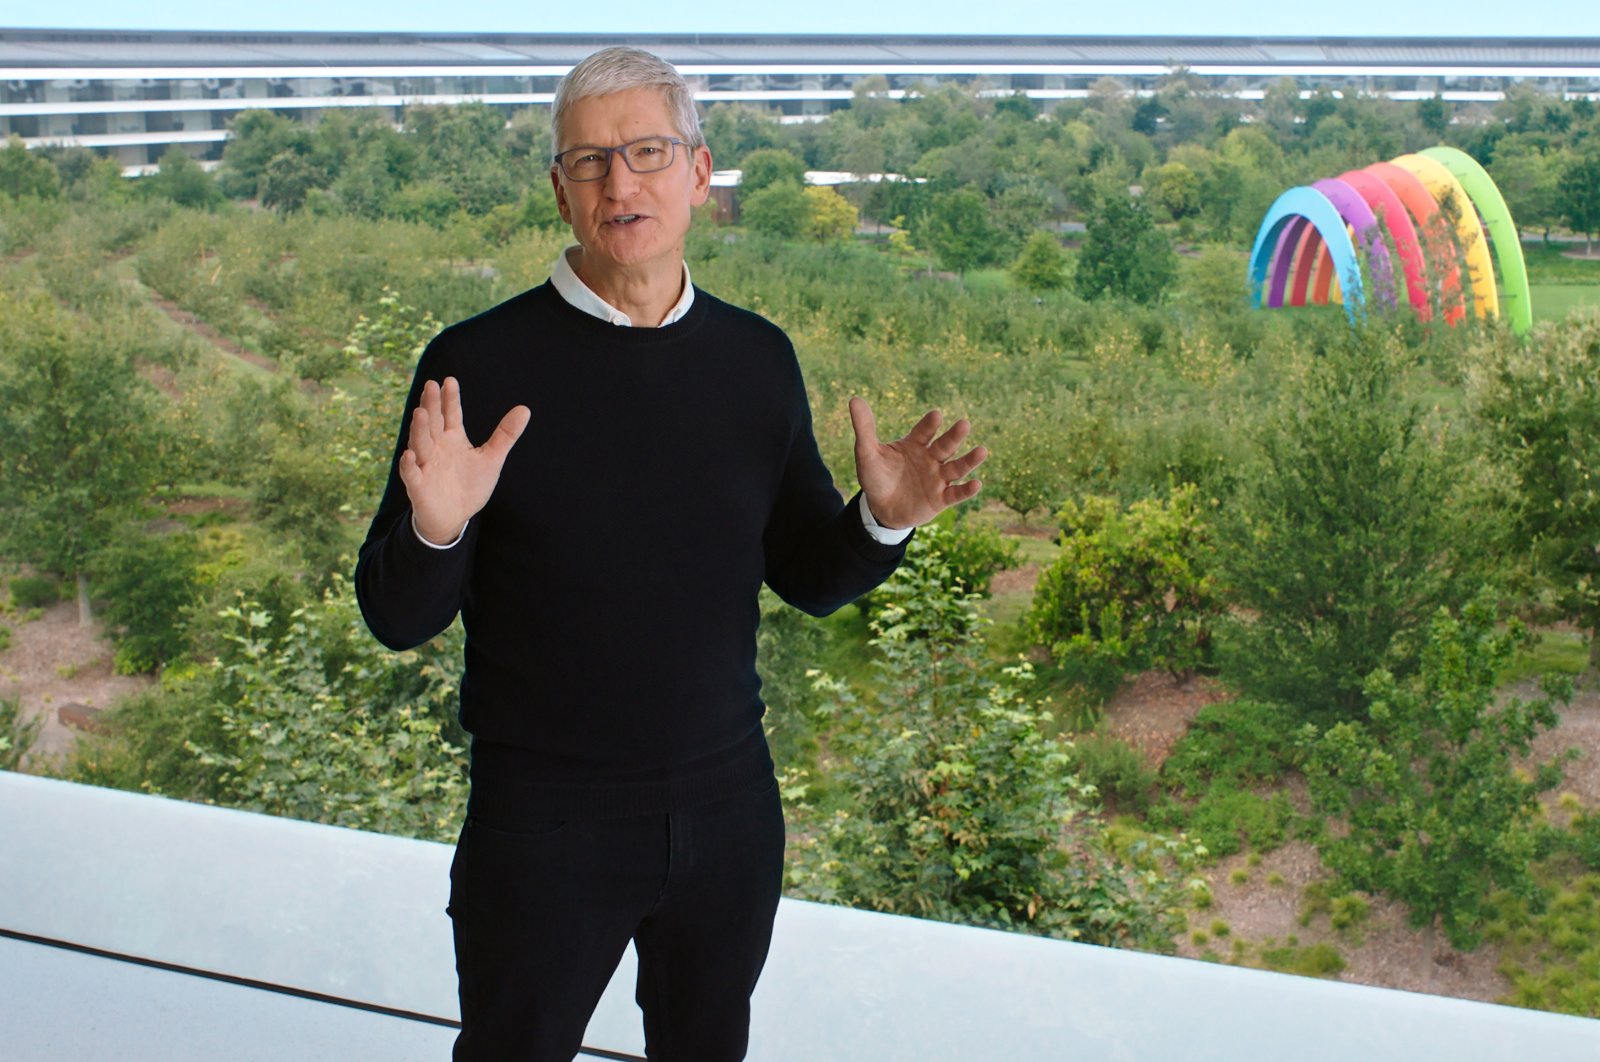 Apple CEO Tim Cook speaks during a special event at the company's headquarters in Cupertino, Calif., in a still image from video released on Sept. 15, 2020. (Reuters Photo)